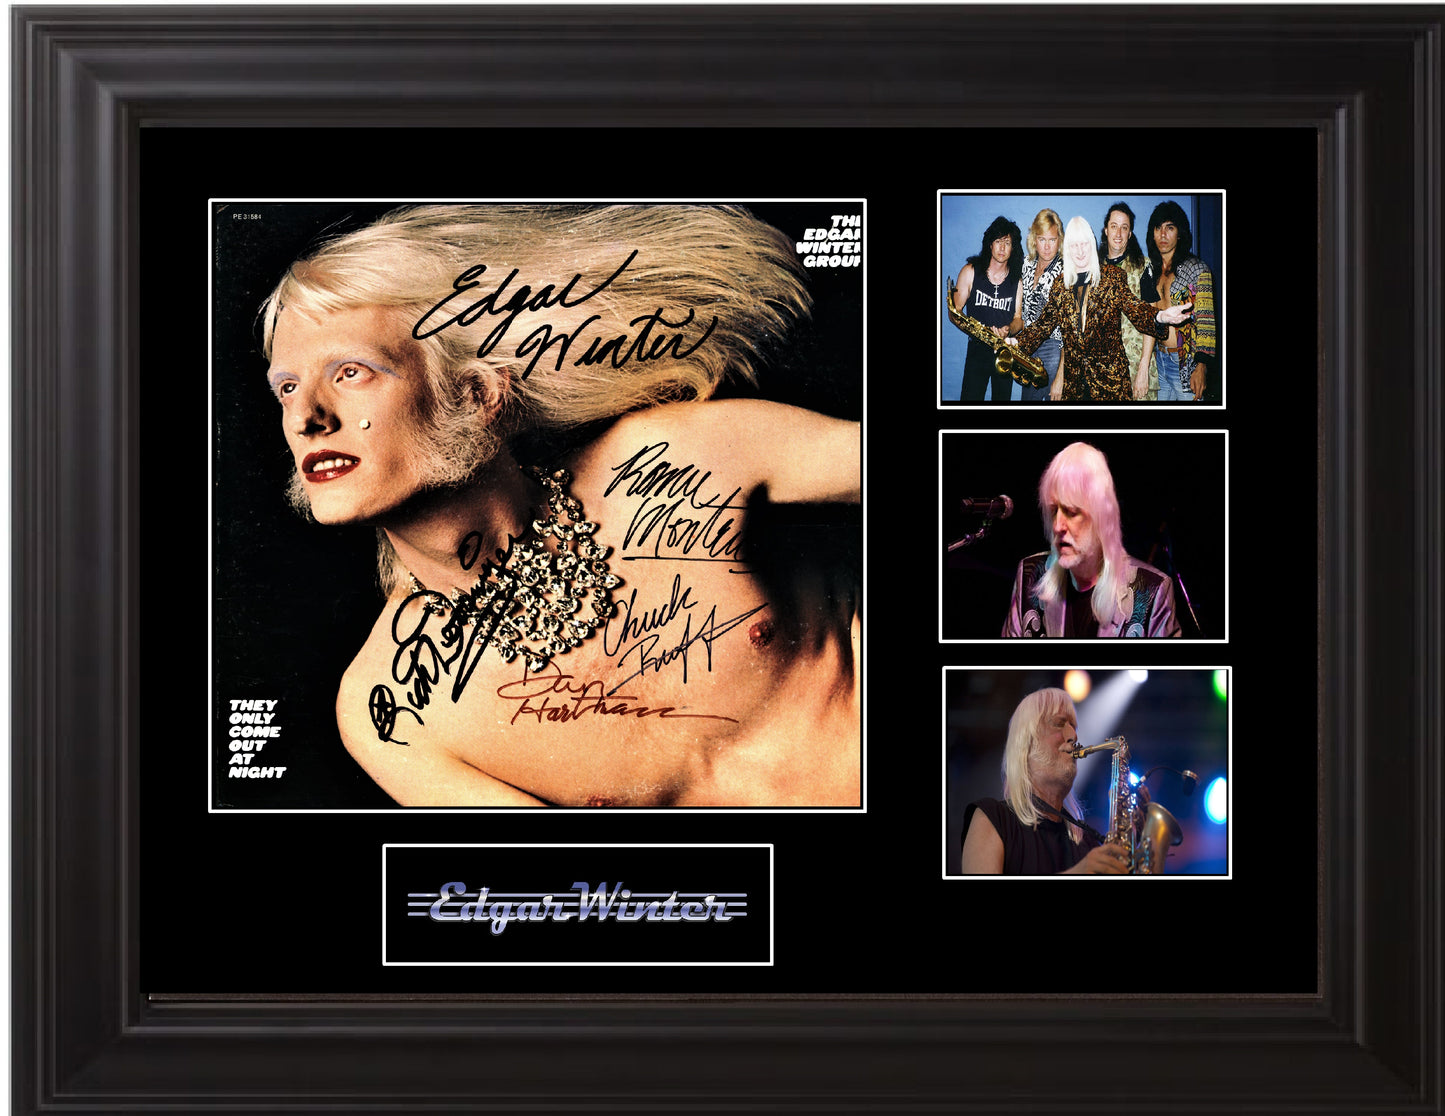 Edgar Winter Group Signed LP - Zion Graphic Collectibles